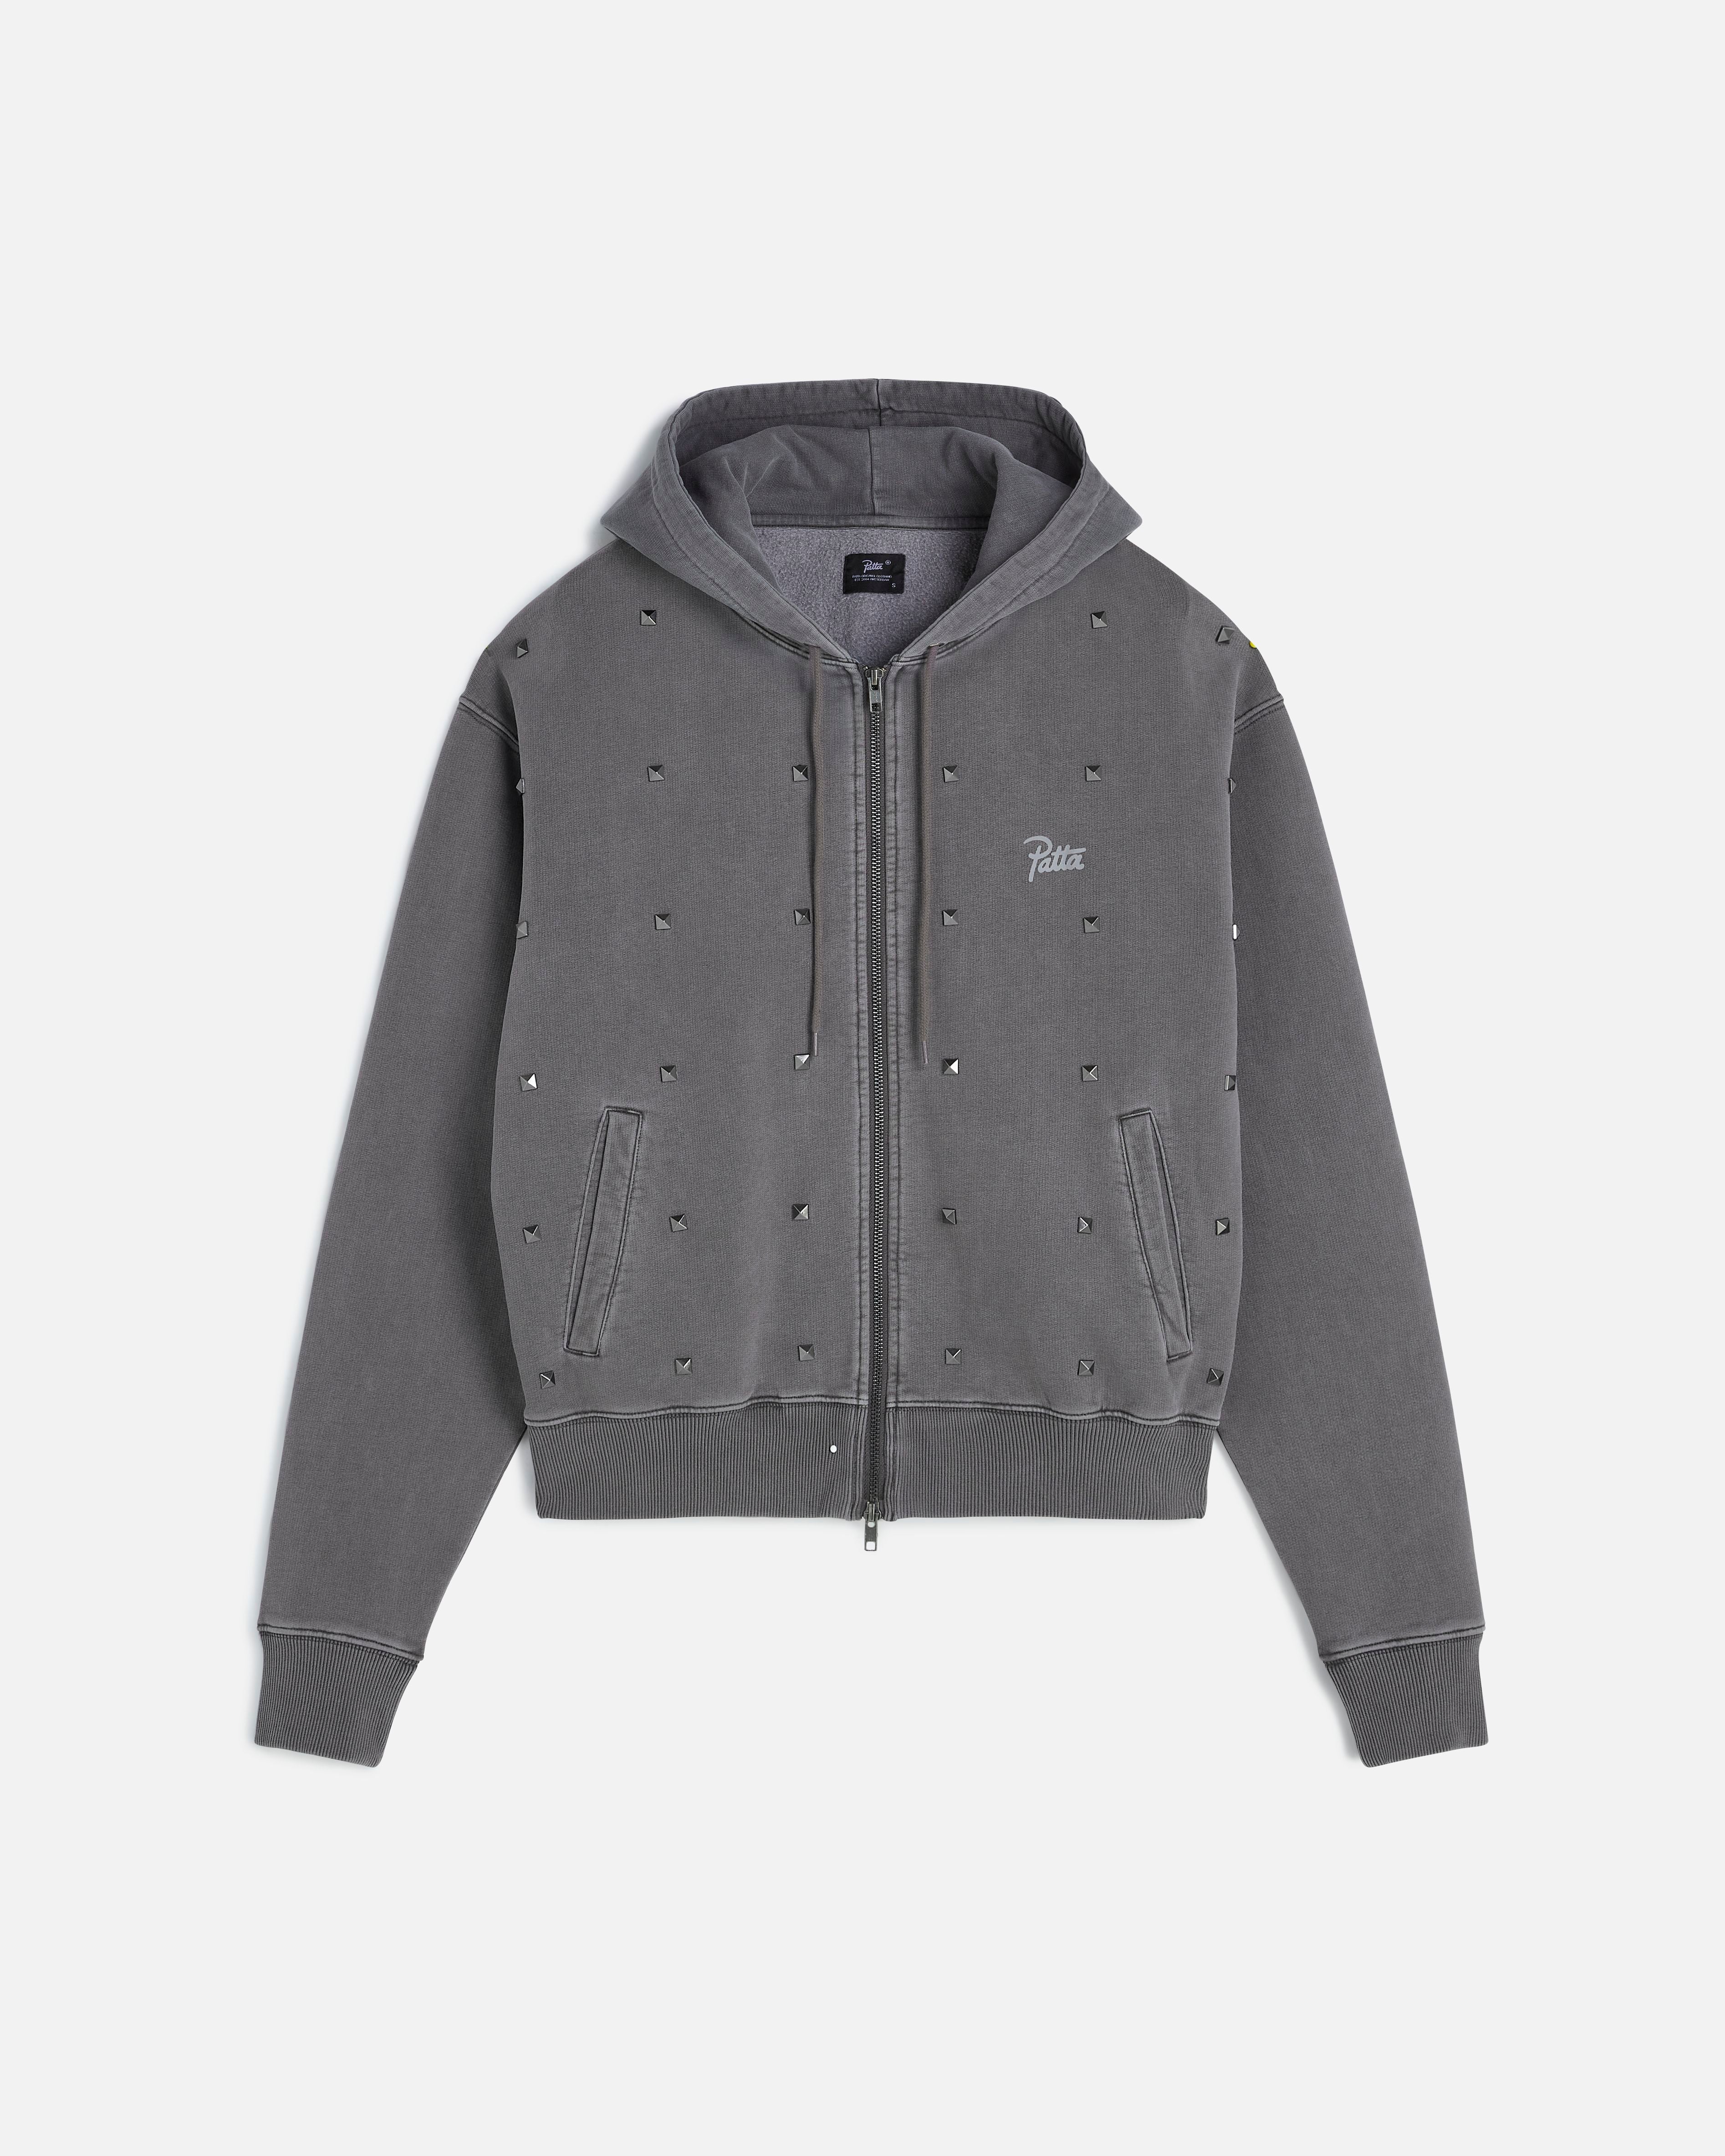 Patta Studded Washed Zip Up Hooded Sweater (Volcanic Glass) – Patta US